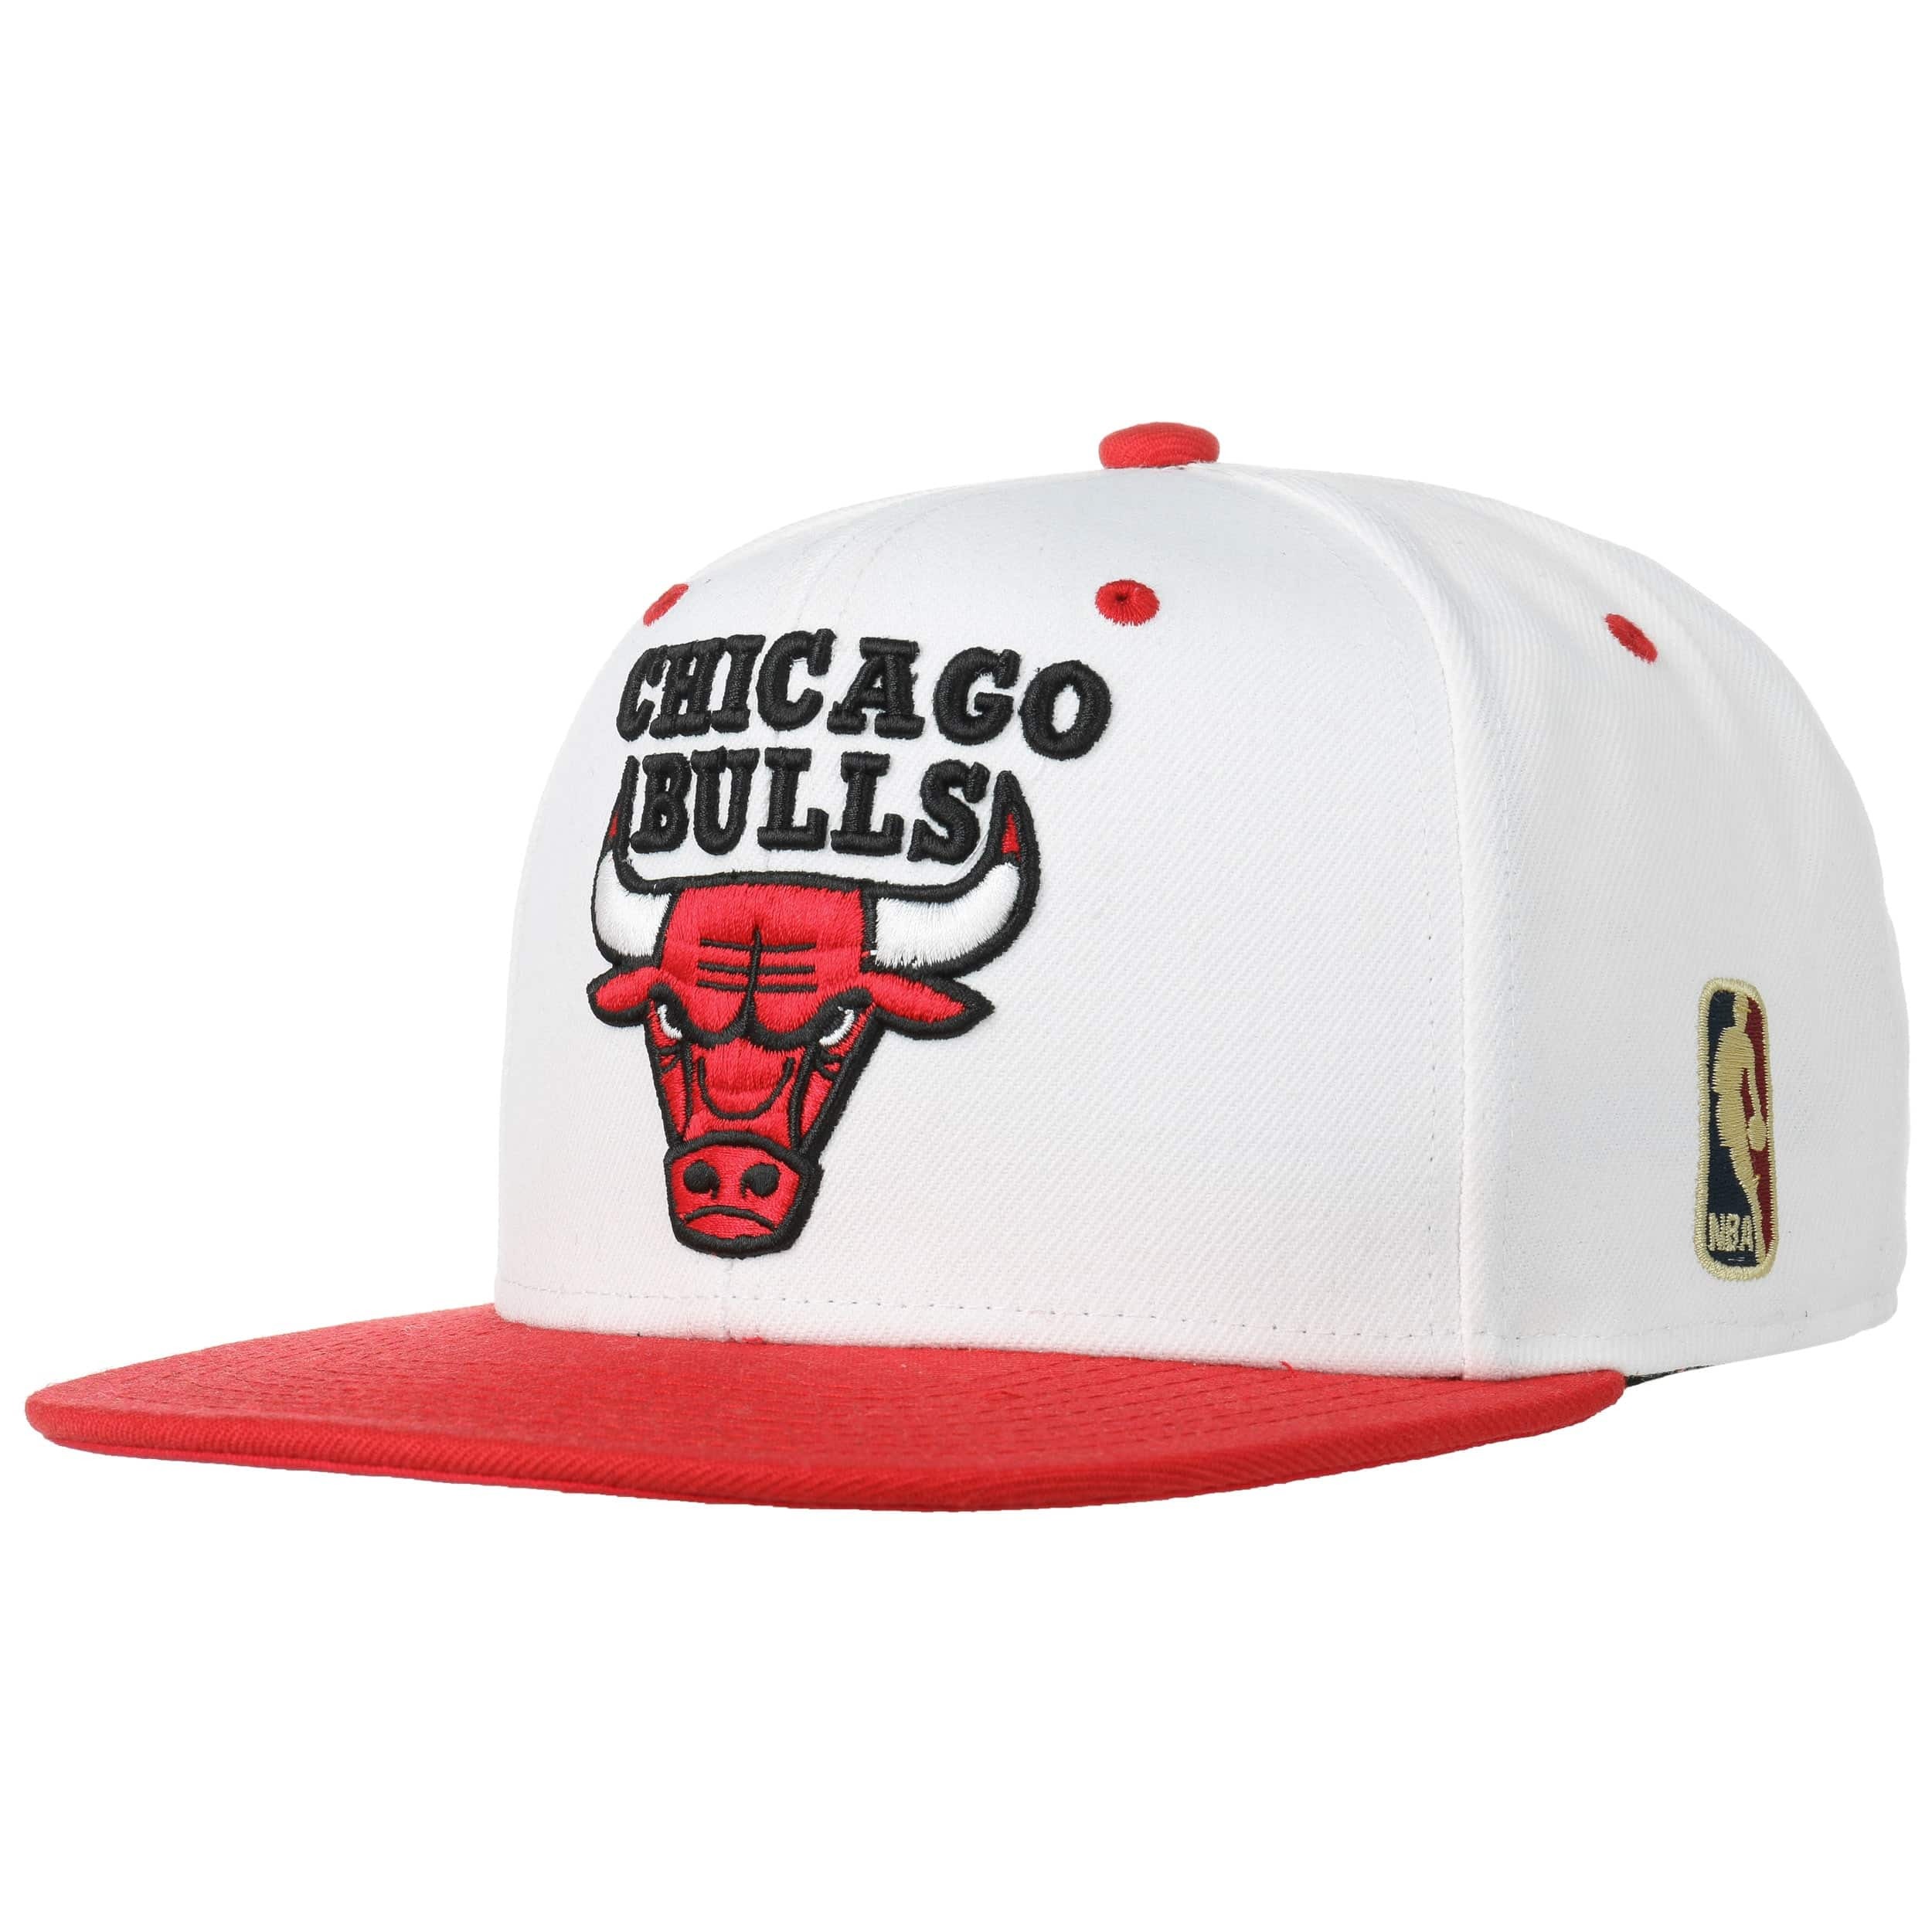 Men's Mitchell & Ness White Chicago Bulls Hardwood Classics 1993 NBA Champions Back to Back to Back Fitted Hat, Size: 7 1/4, Bul White